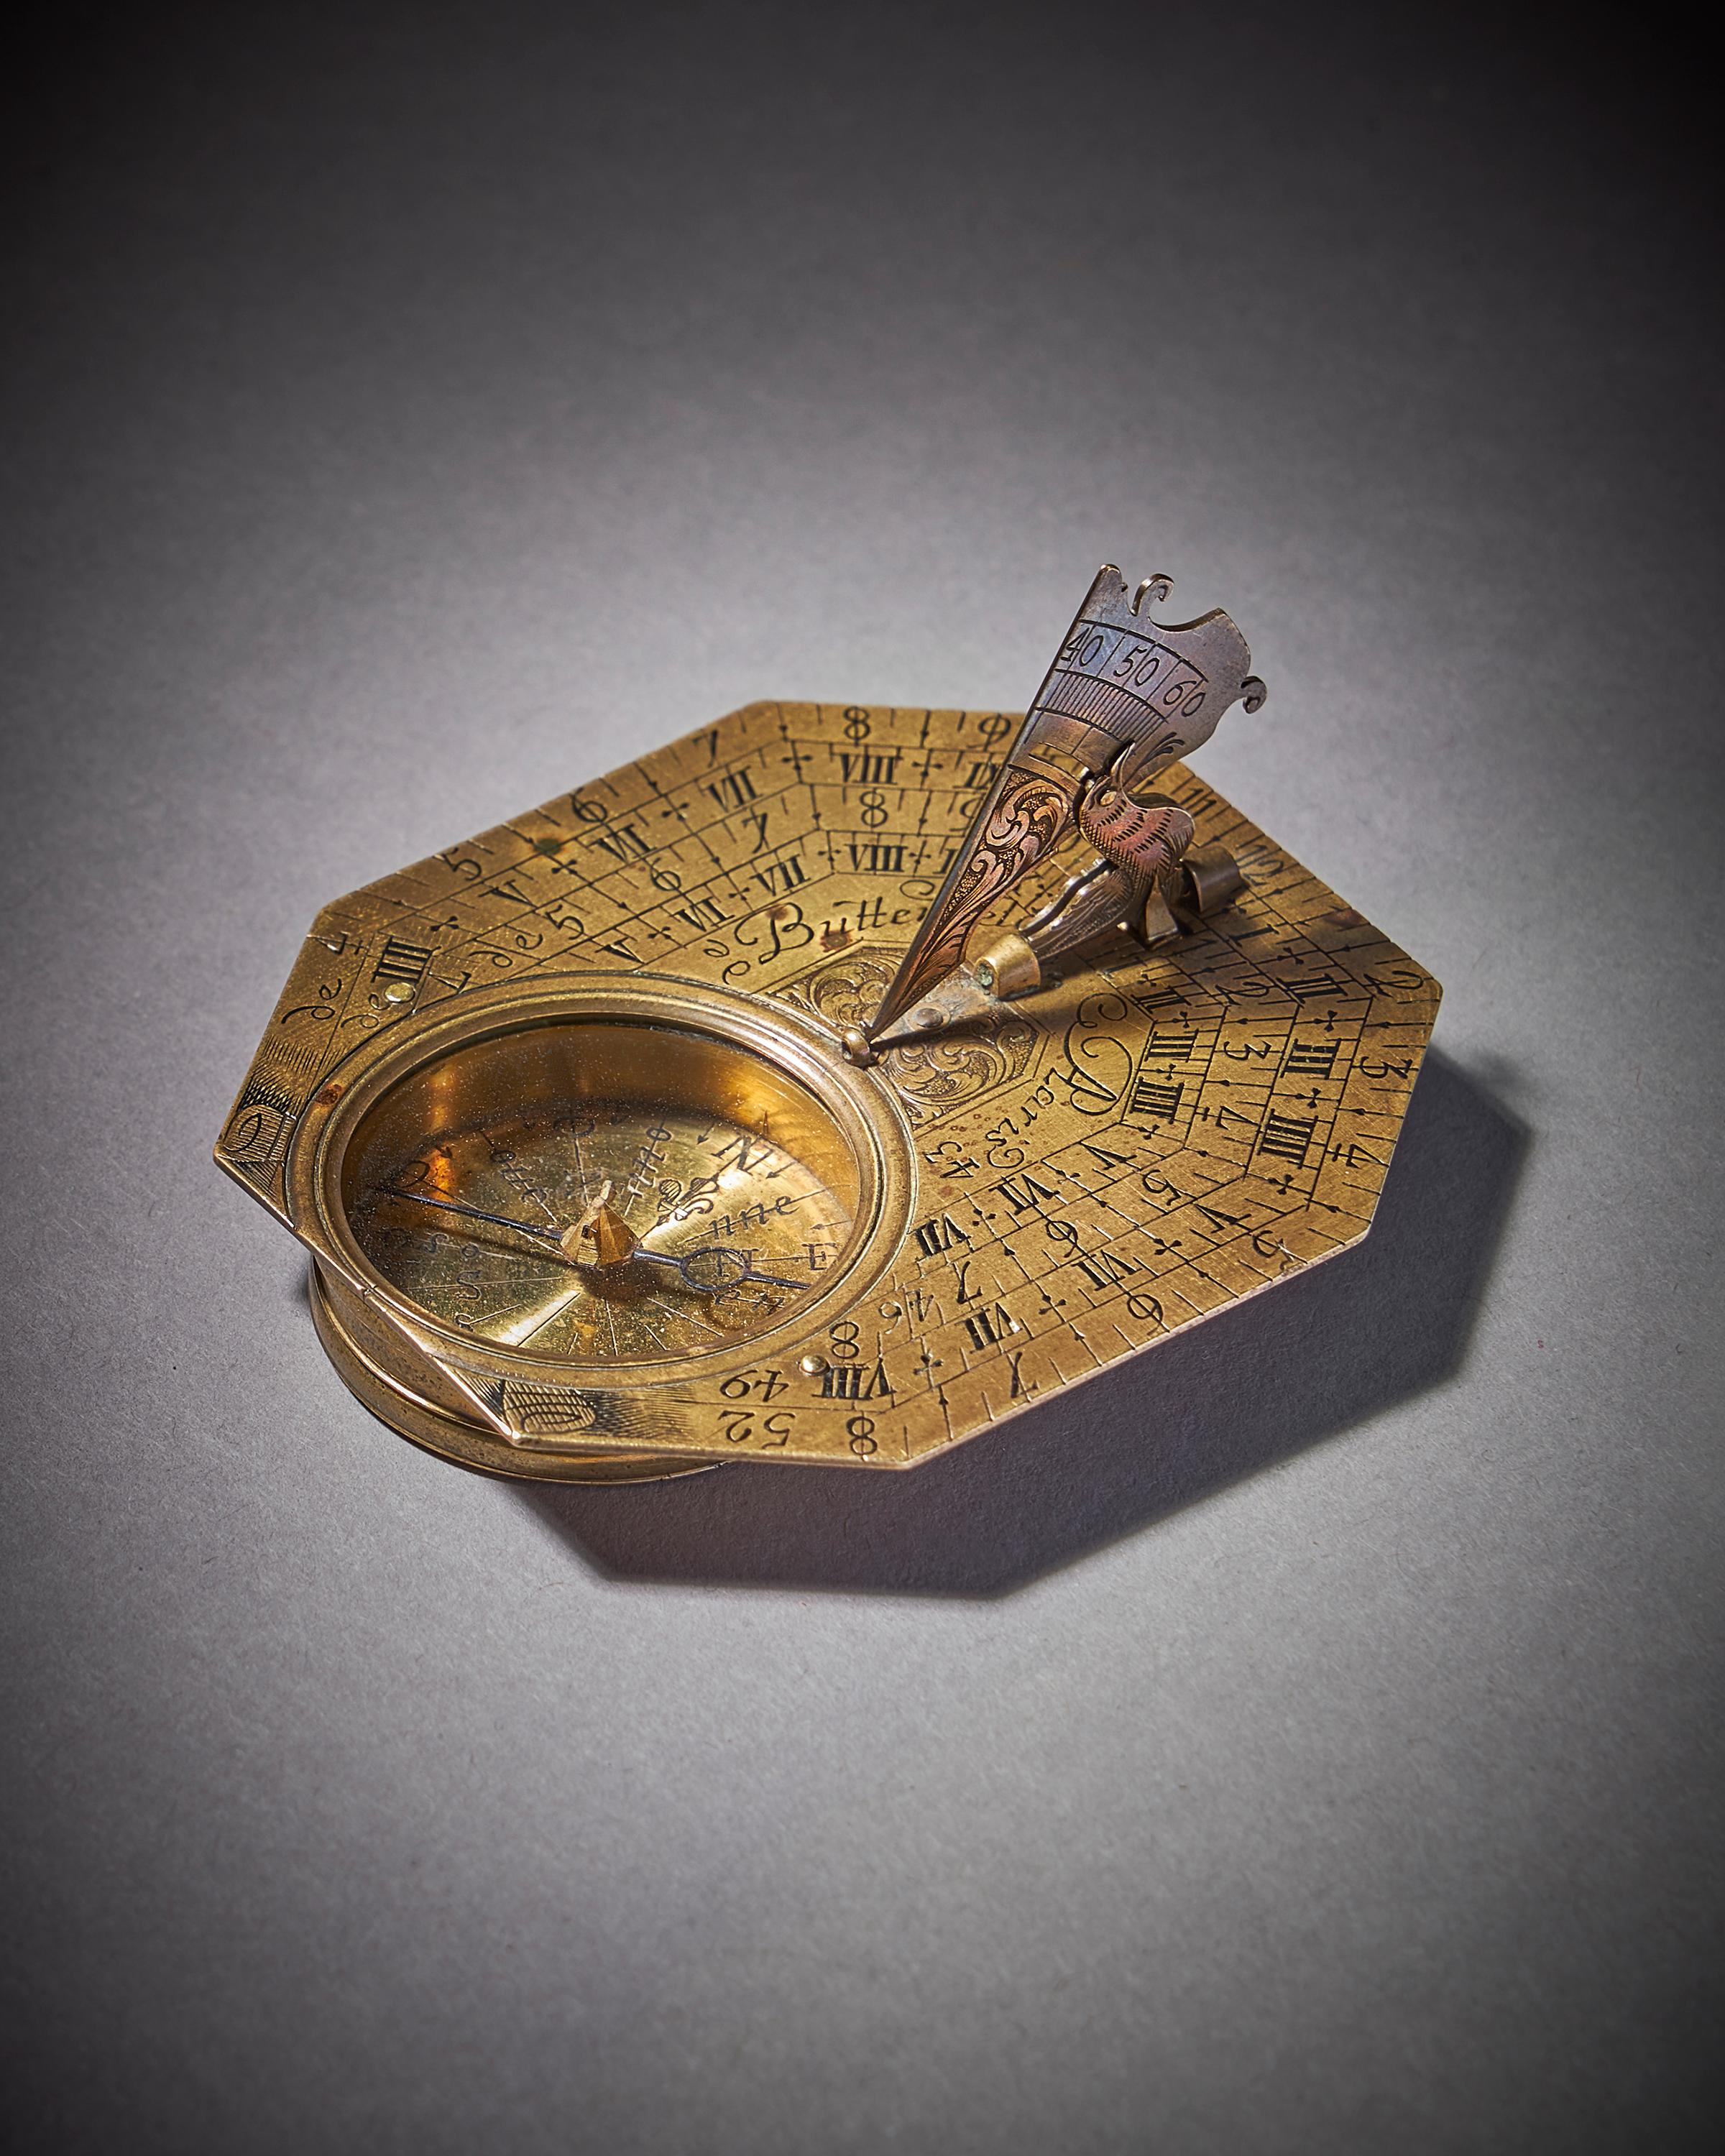 A fine brass Anglo-French octagonal pocket sundial with compass by Michael Butterfield, circa 1700. 

The sundial can be used anywhere between latitudes of 40° and 60° covering Southern Spain and Italy north to Scandinavia. The elaborately